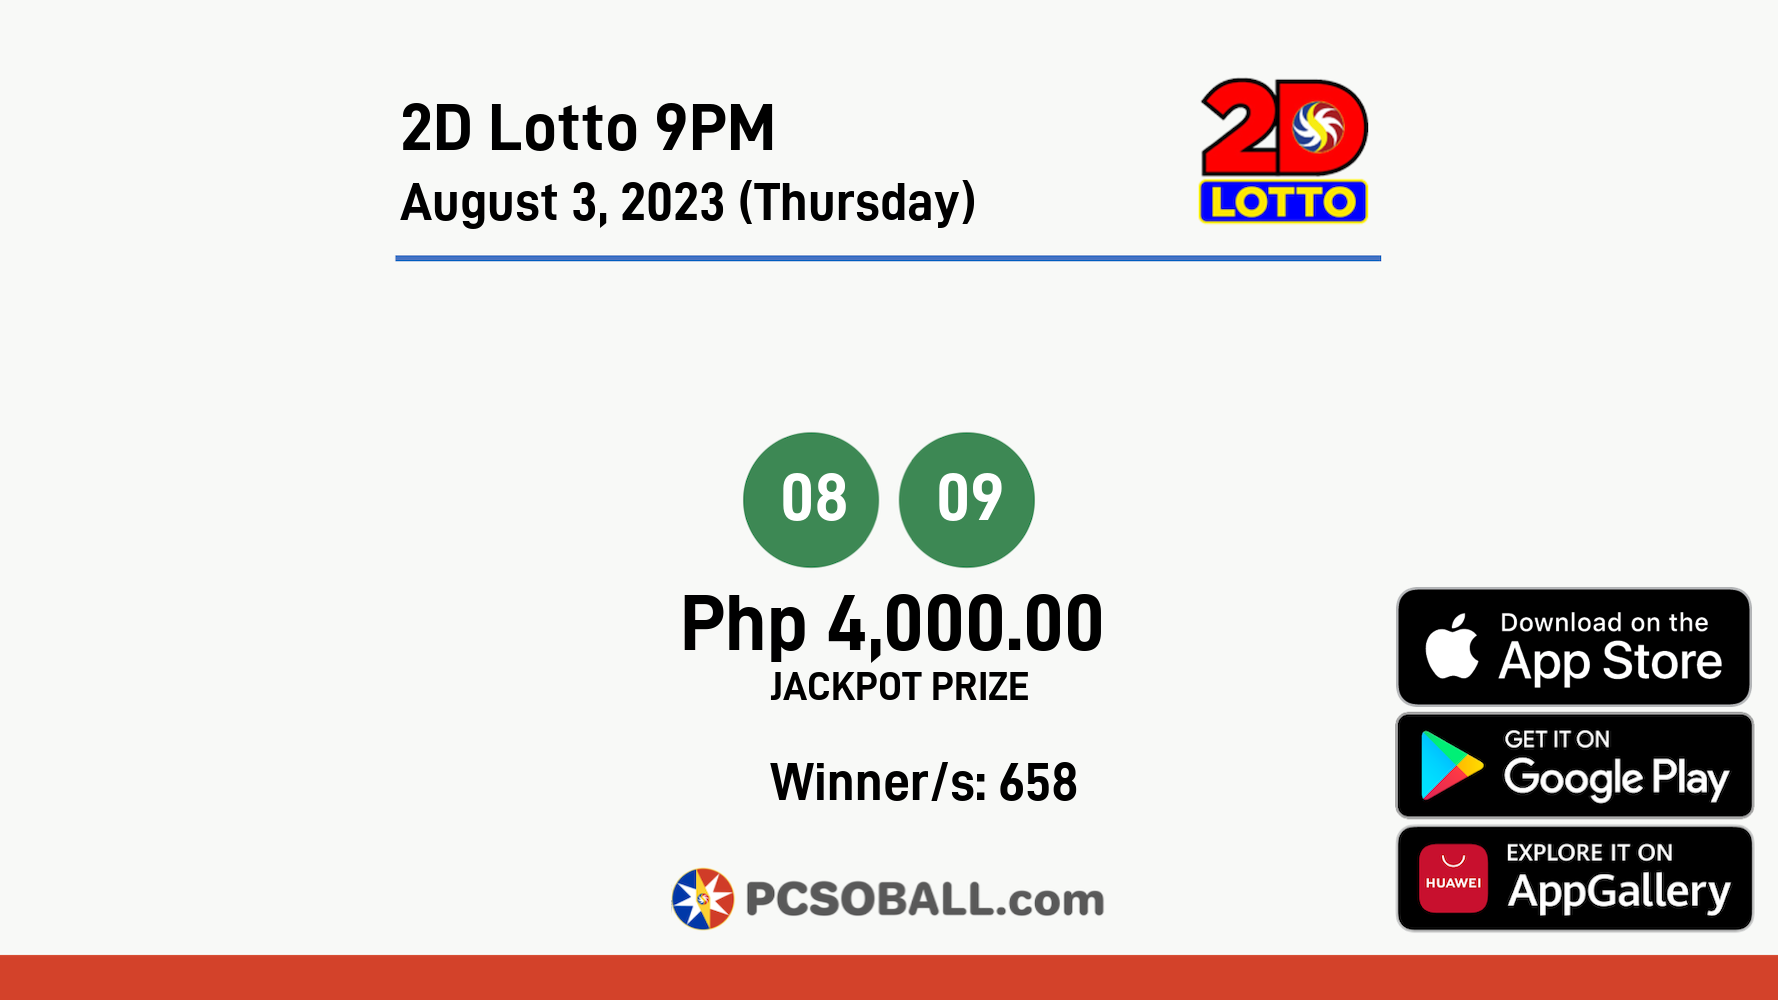 2D Lotto 9PM August 3, 2023 (Thursday) Result